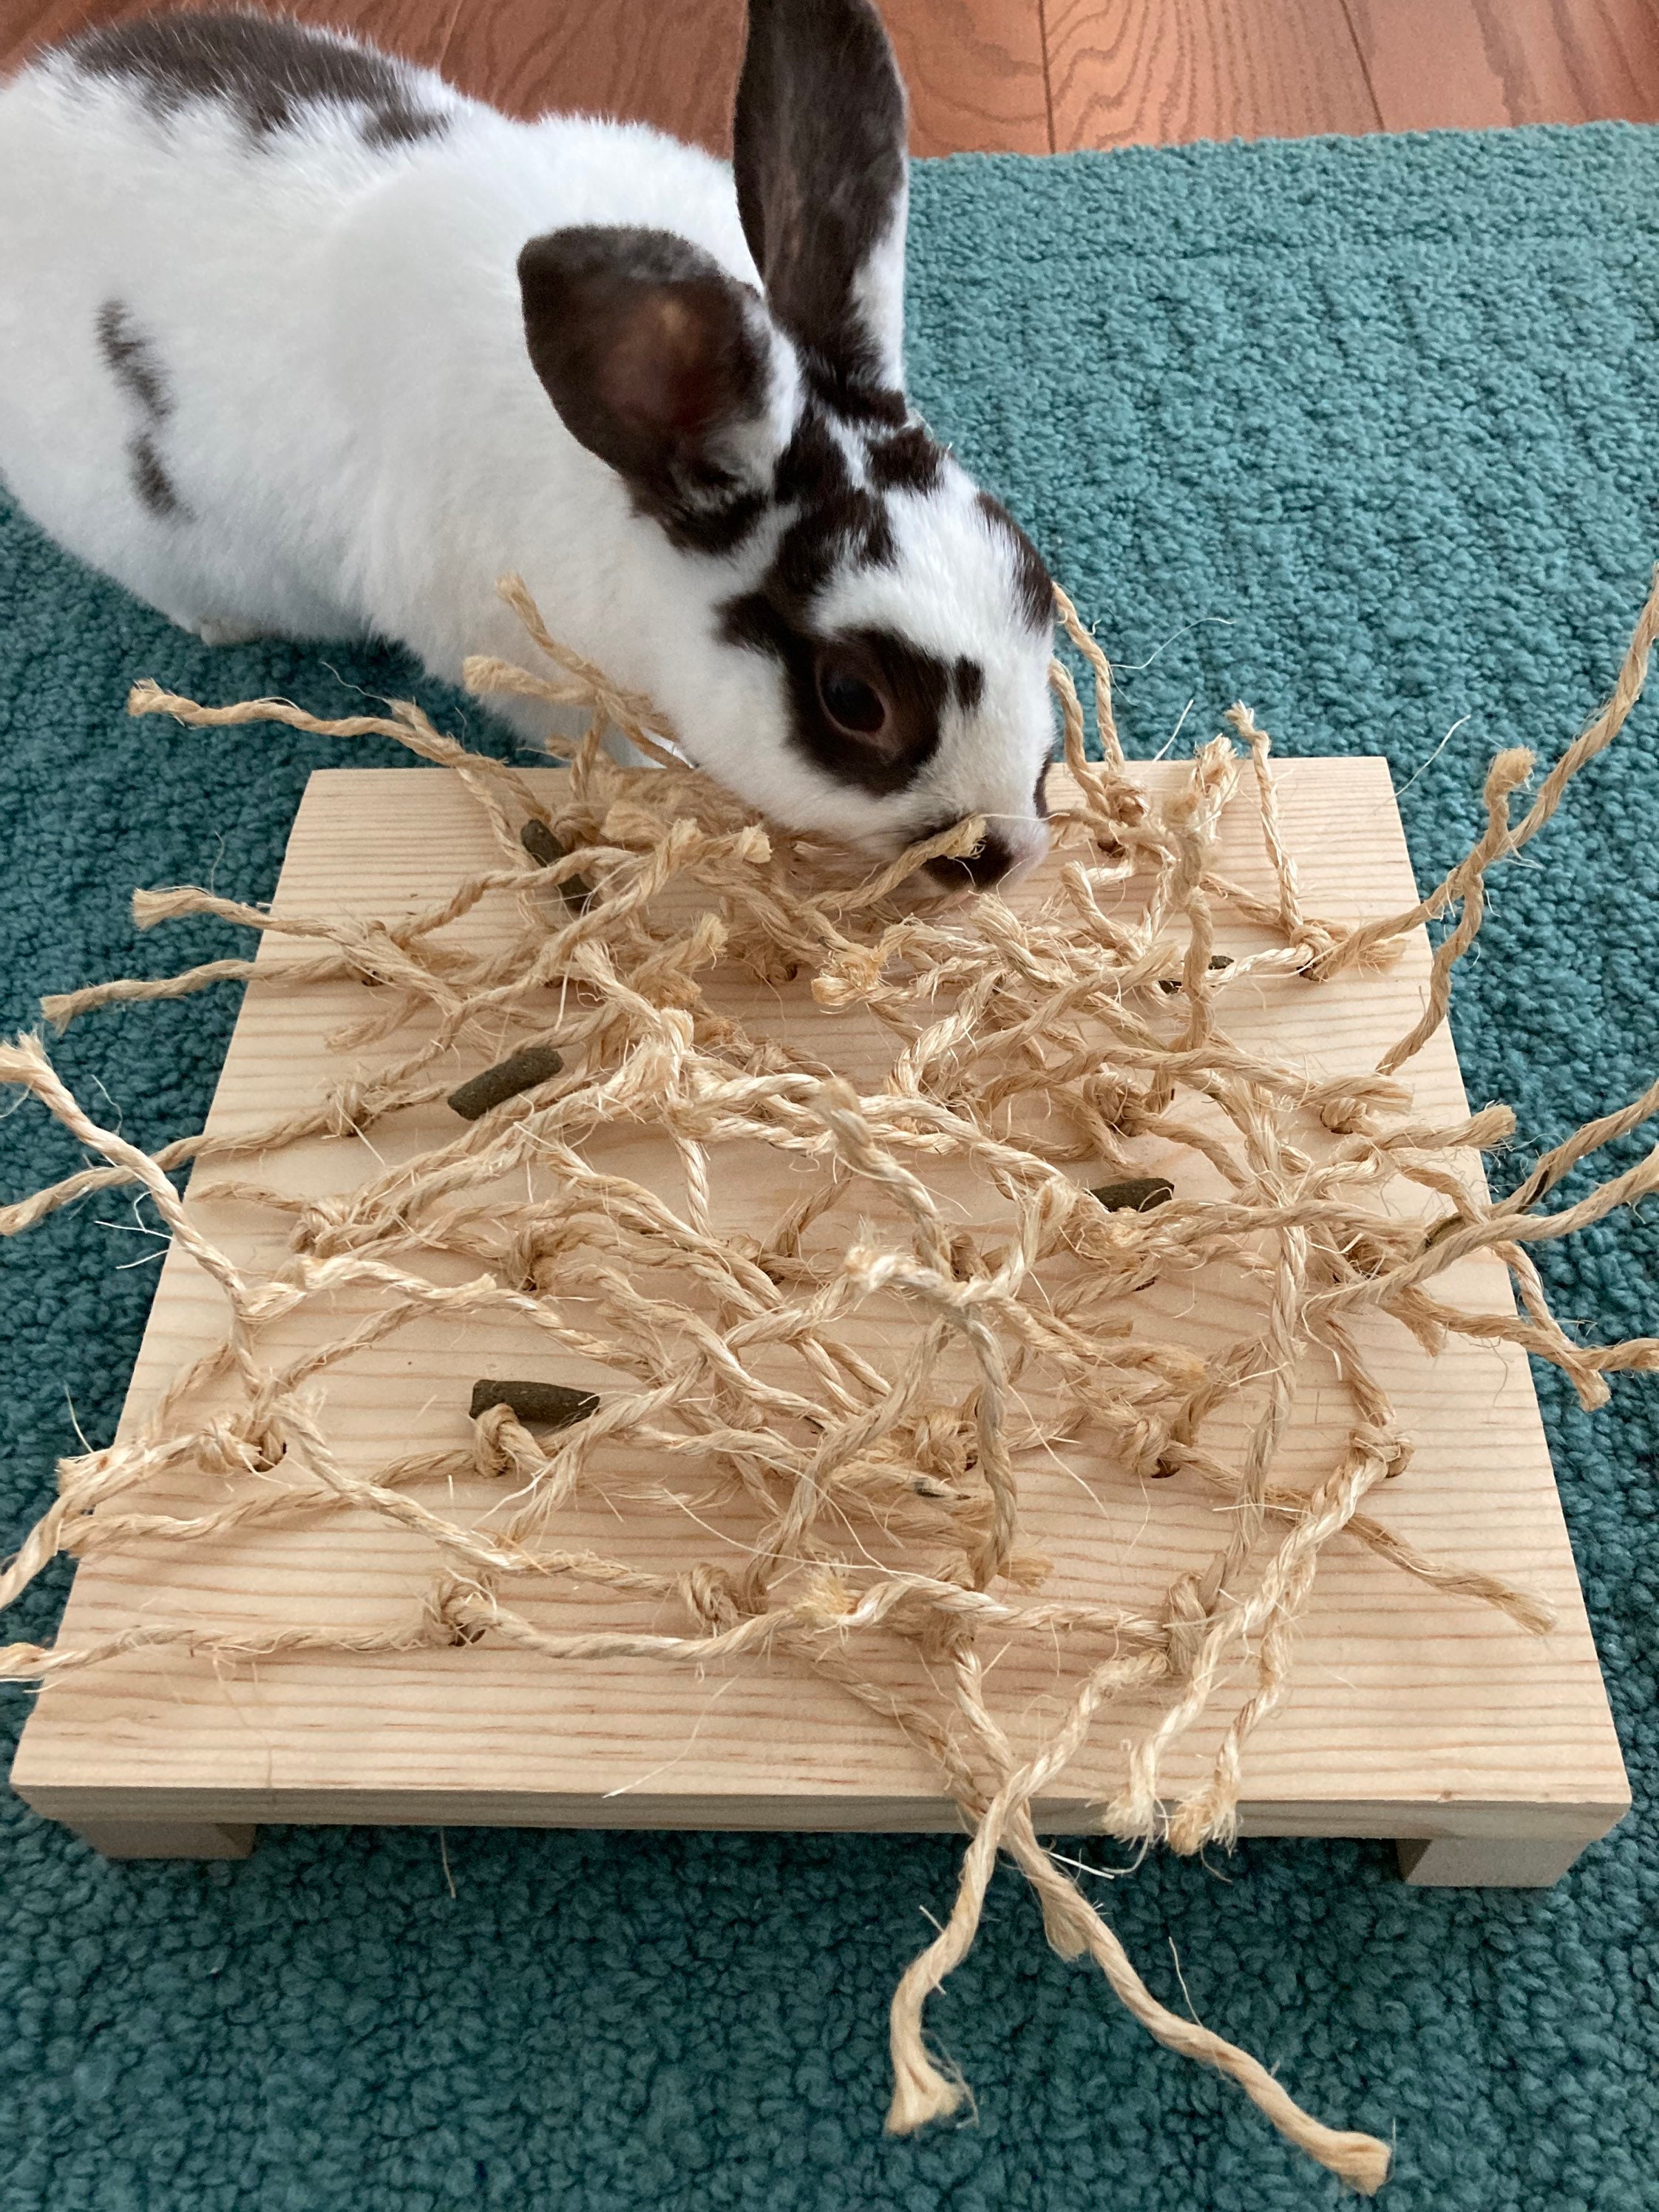 Bunny Wood Sisal Digging Toy, Small Pet Chew Toy, Rabbit Enrichment, Mental  Stimulation for Pets 